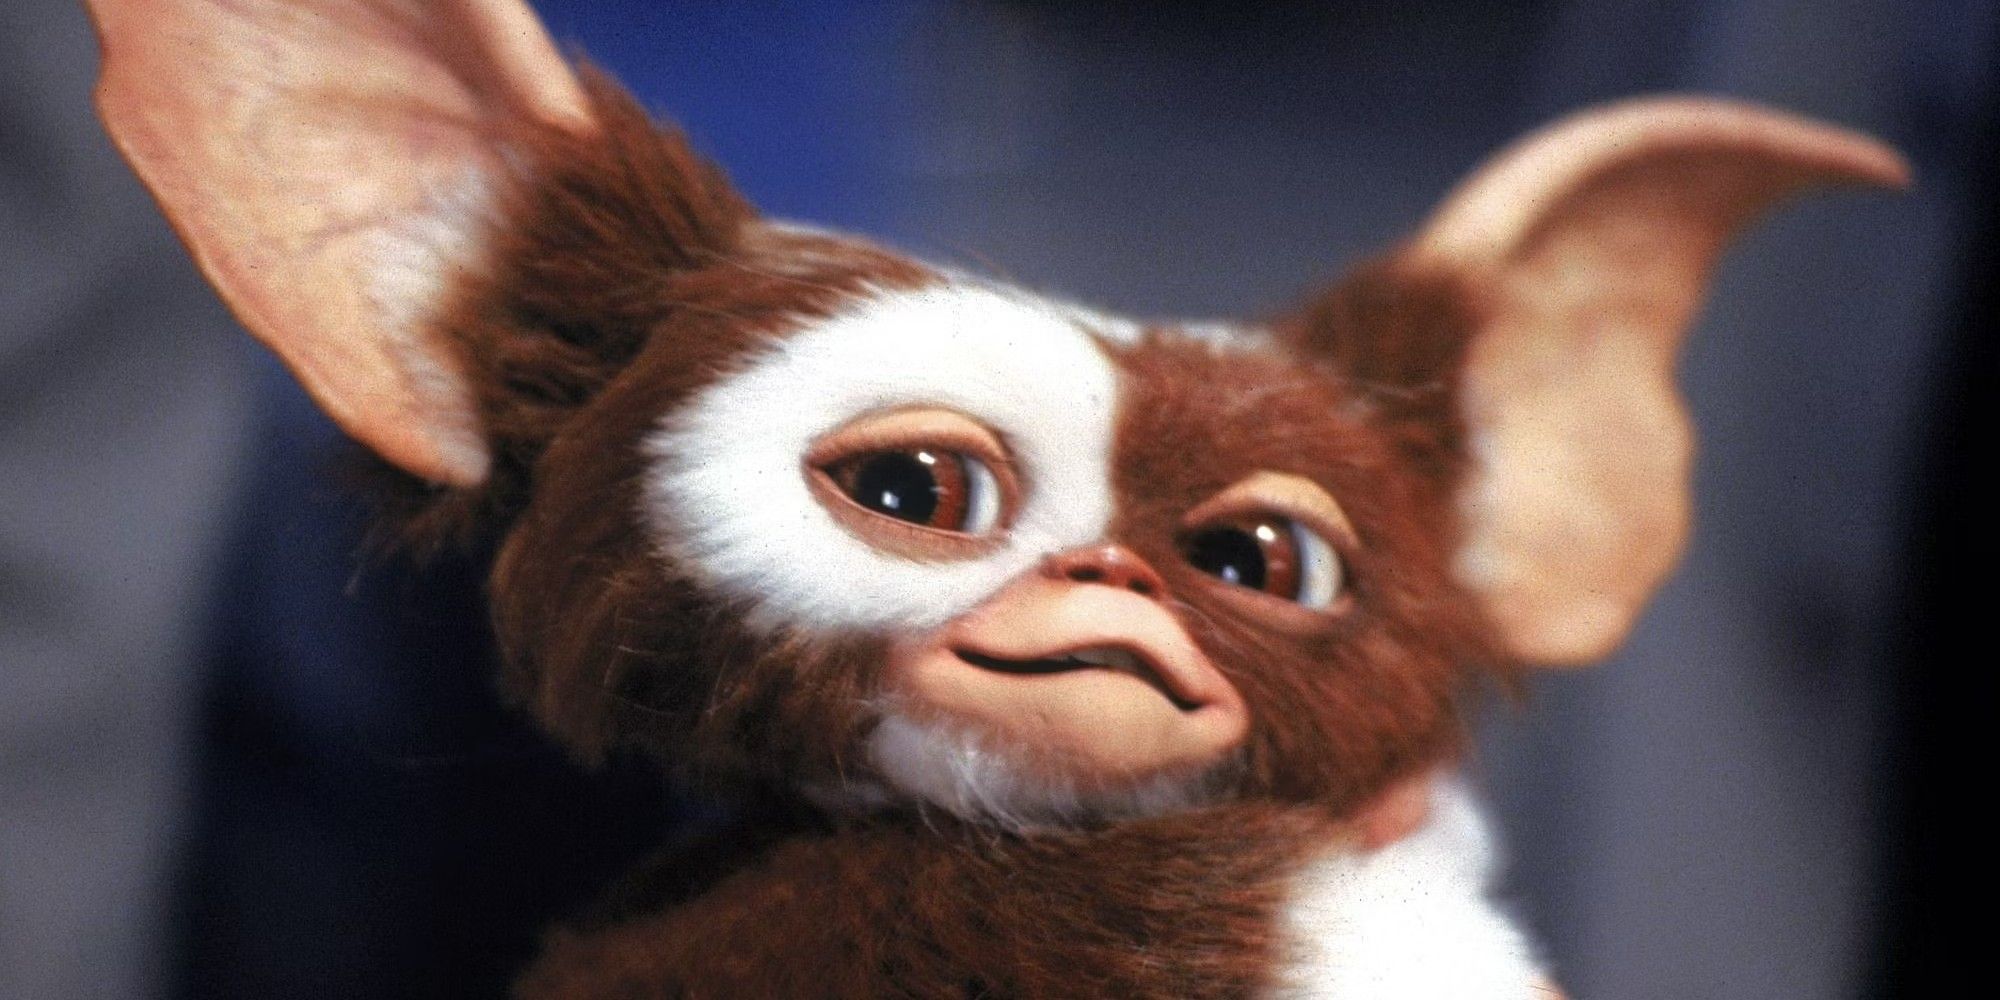 Gremlins director thinks Baby Yoda is a ripoff of Gizmo